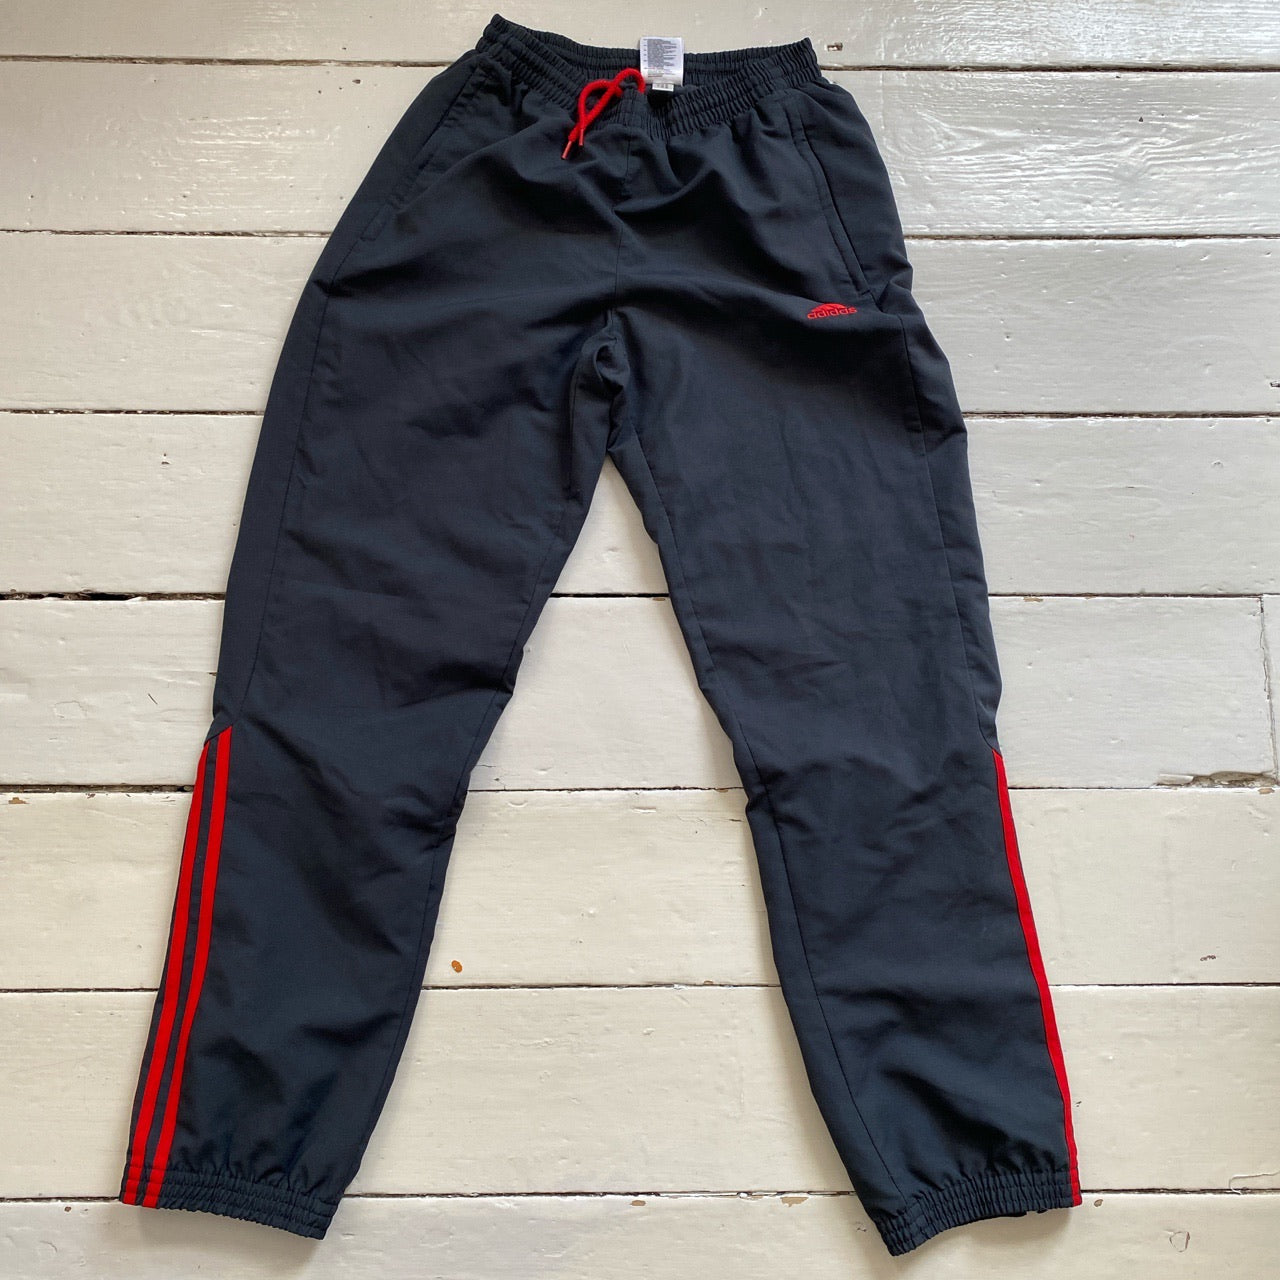 Adidas Black and Red Shell Bottoms (Small)